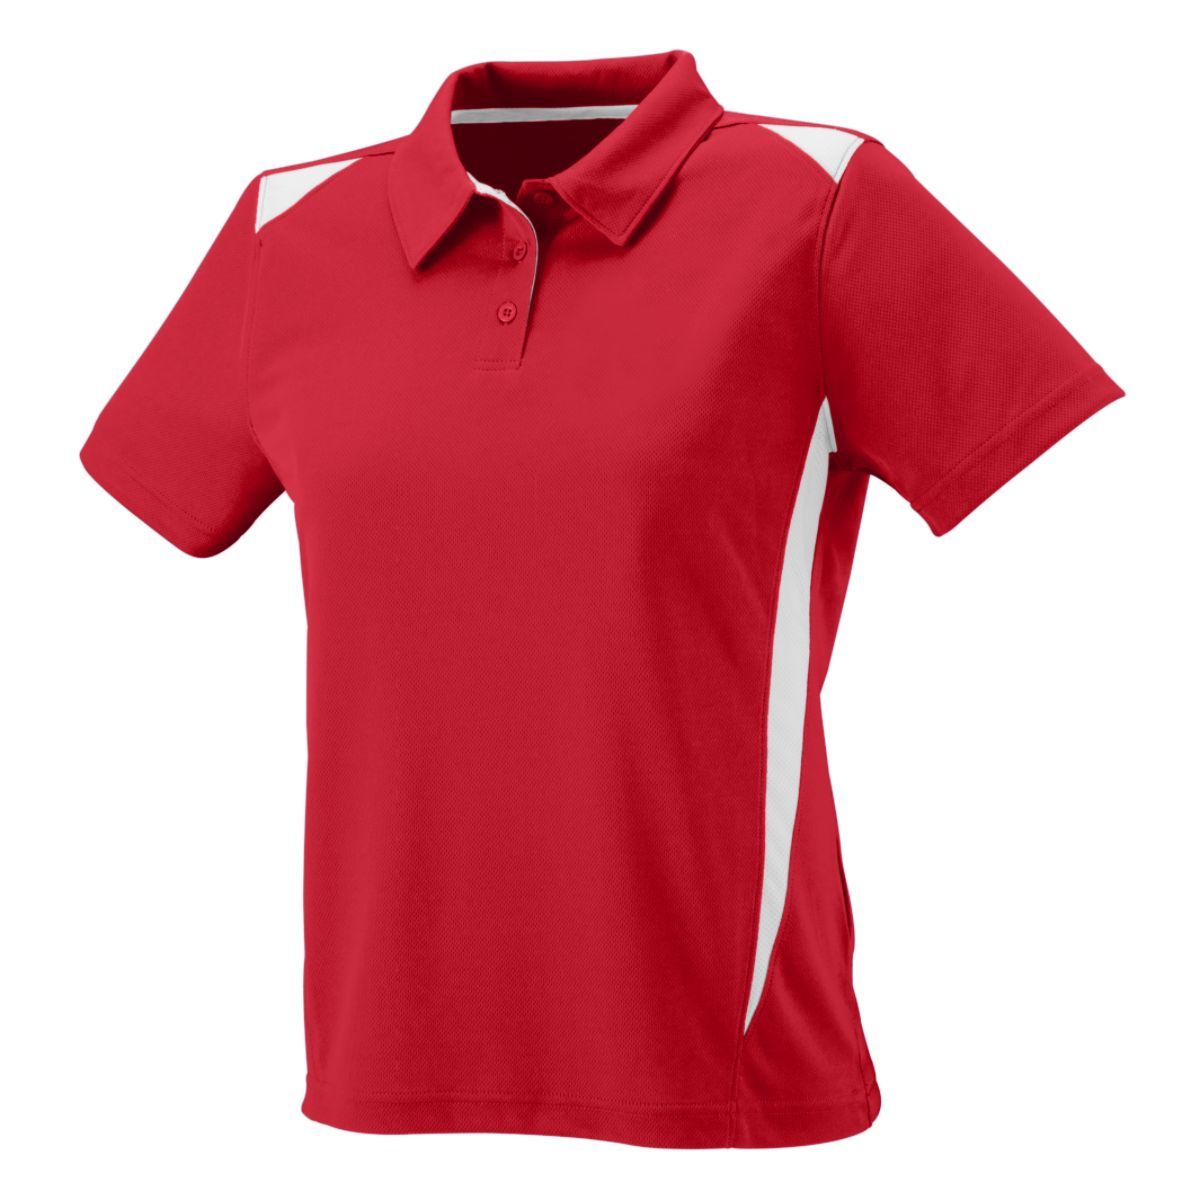 Augusta Sportswear Ladies Premier Polo in Red/White  -Part of the Ladies, Ladies-Polo, Polos, Augusta-Products, Shirts product lines at KanaleyCreations.com